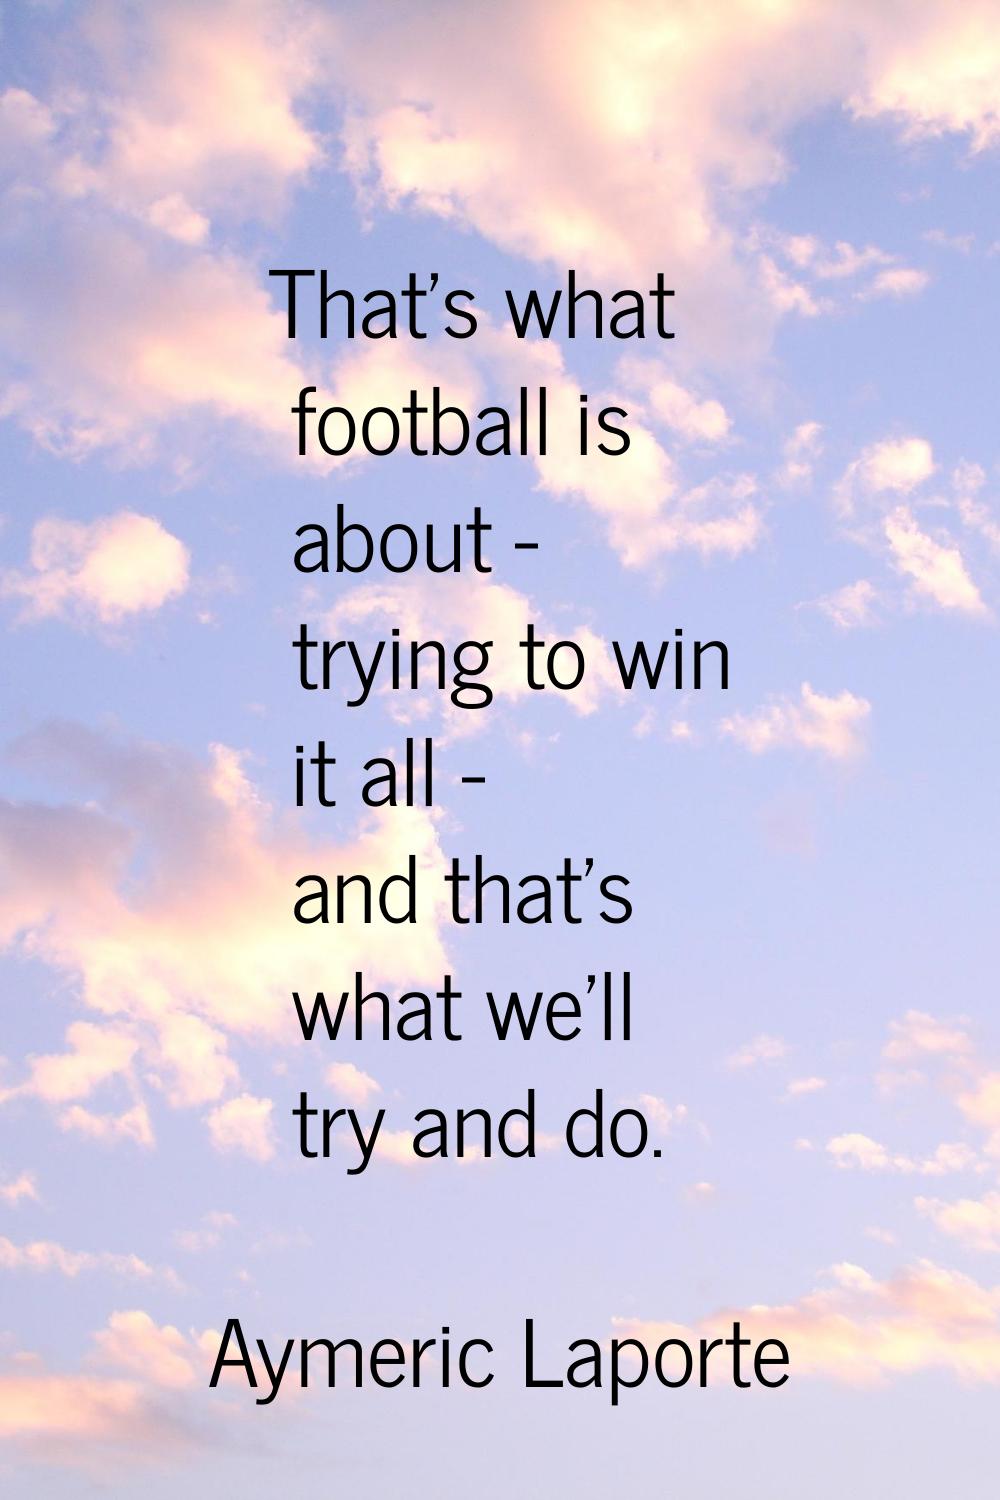 That's what football is about - trying to win it all - and that's what we'll try and do.